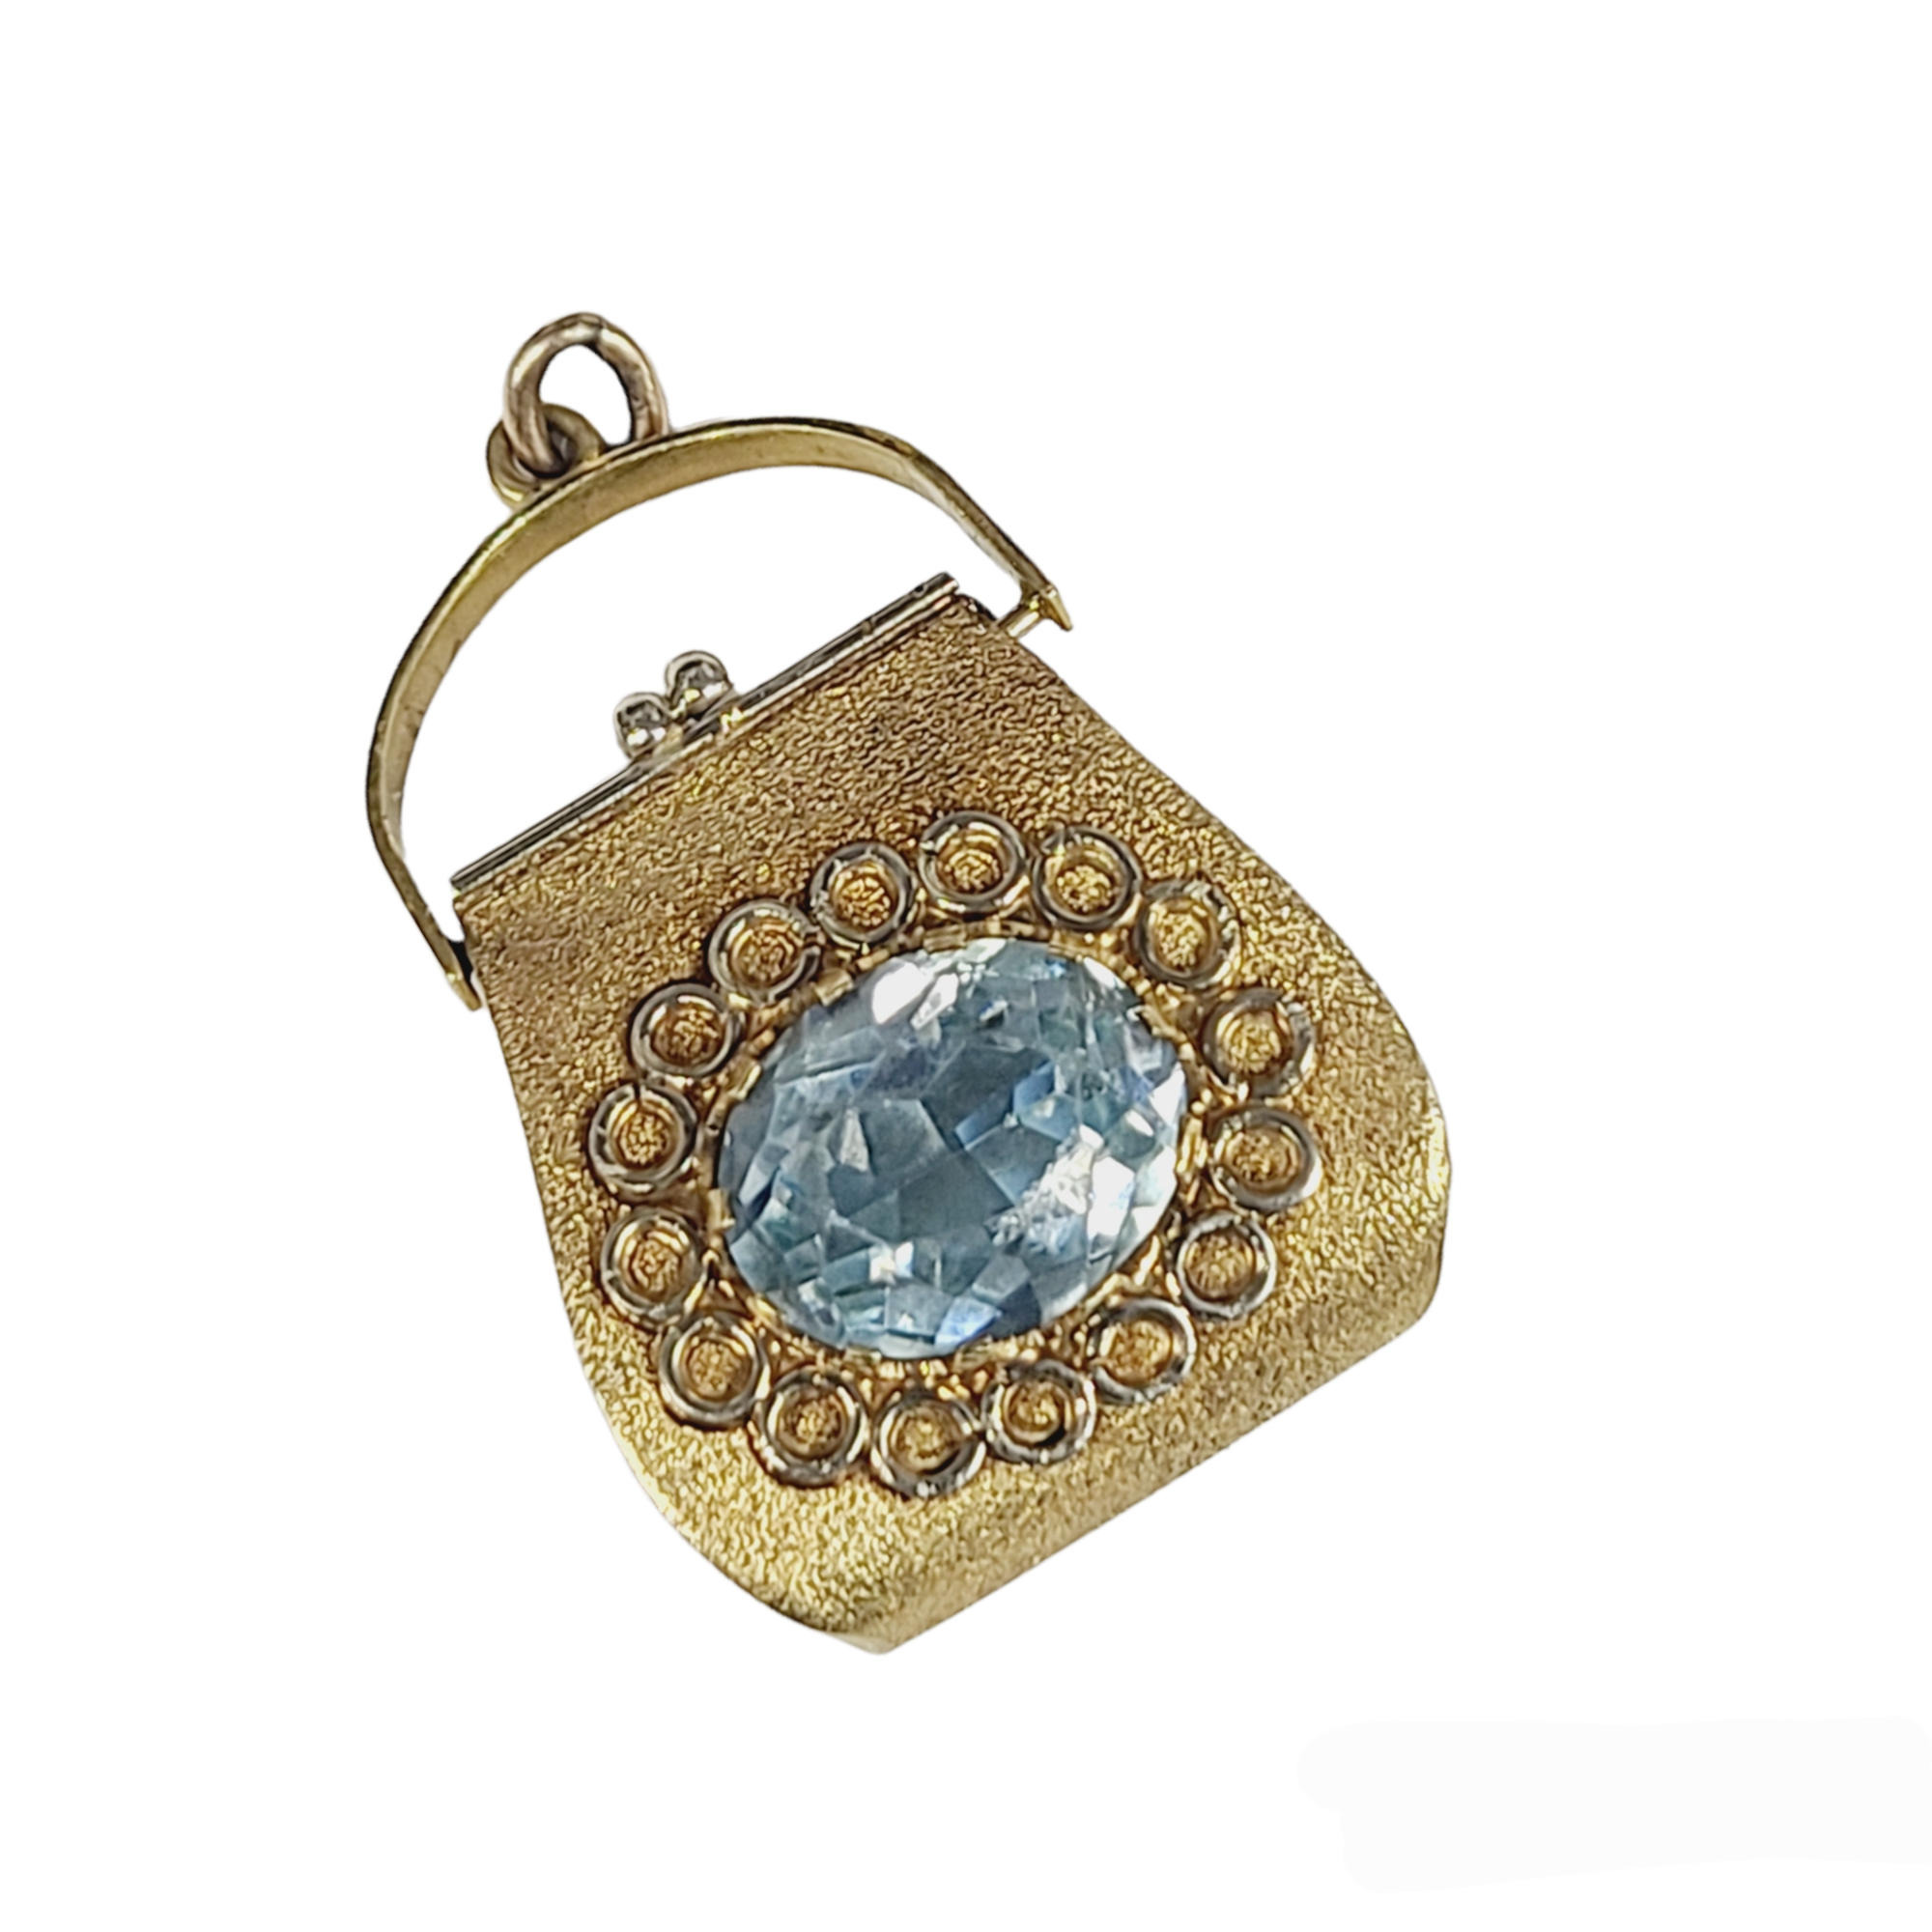 Vintage 18K Yellow Gold Purse Pendant Charm with Blue Stone